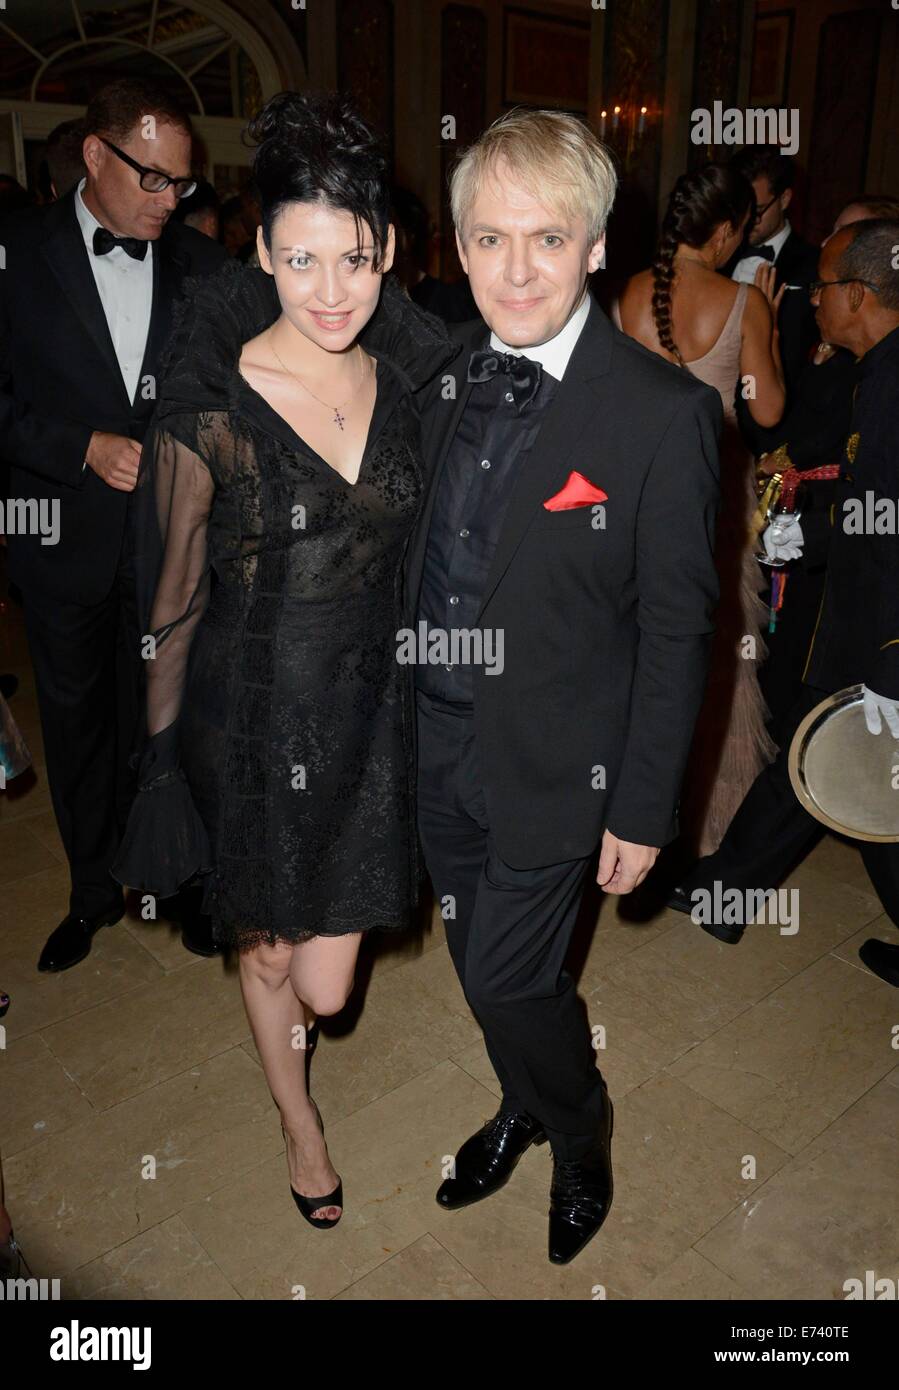 New York, NY, USA. 5th Sep, 2014. Nick Rhodes of Duran Duran, Nefer Suvio at arrivals for Harper's Bazaar Celebrates ICONS by Carine Roitfeld, The Plaza Hotel, New York, NY September 5, 2014. Credit:  Derek Storm/Everett Collection/Alamy Live News Stock Photo